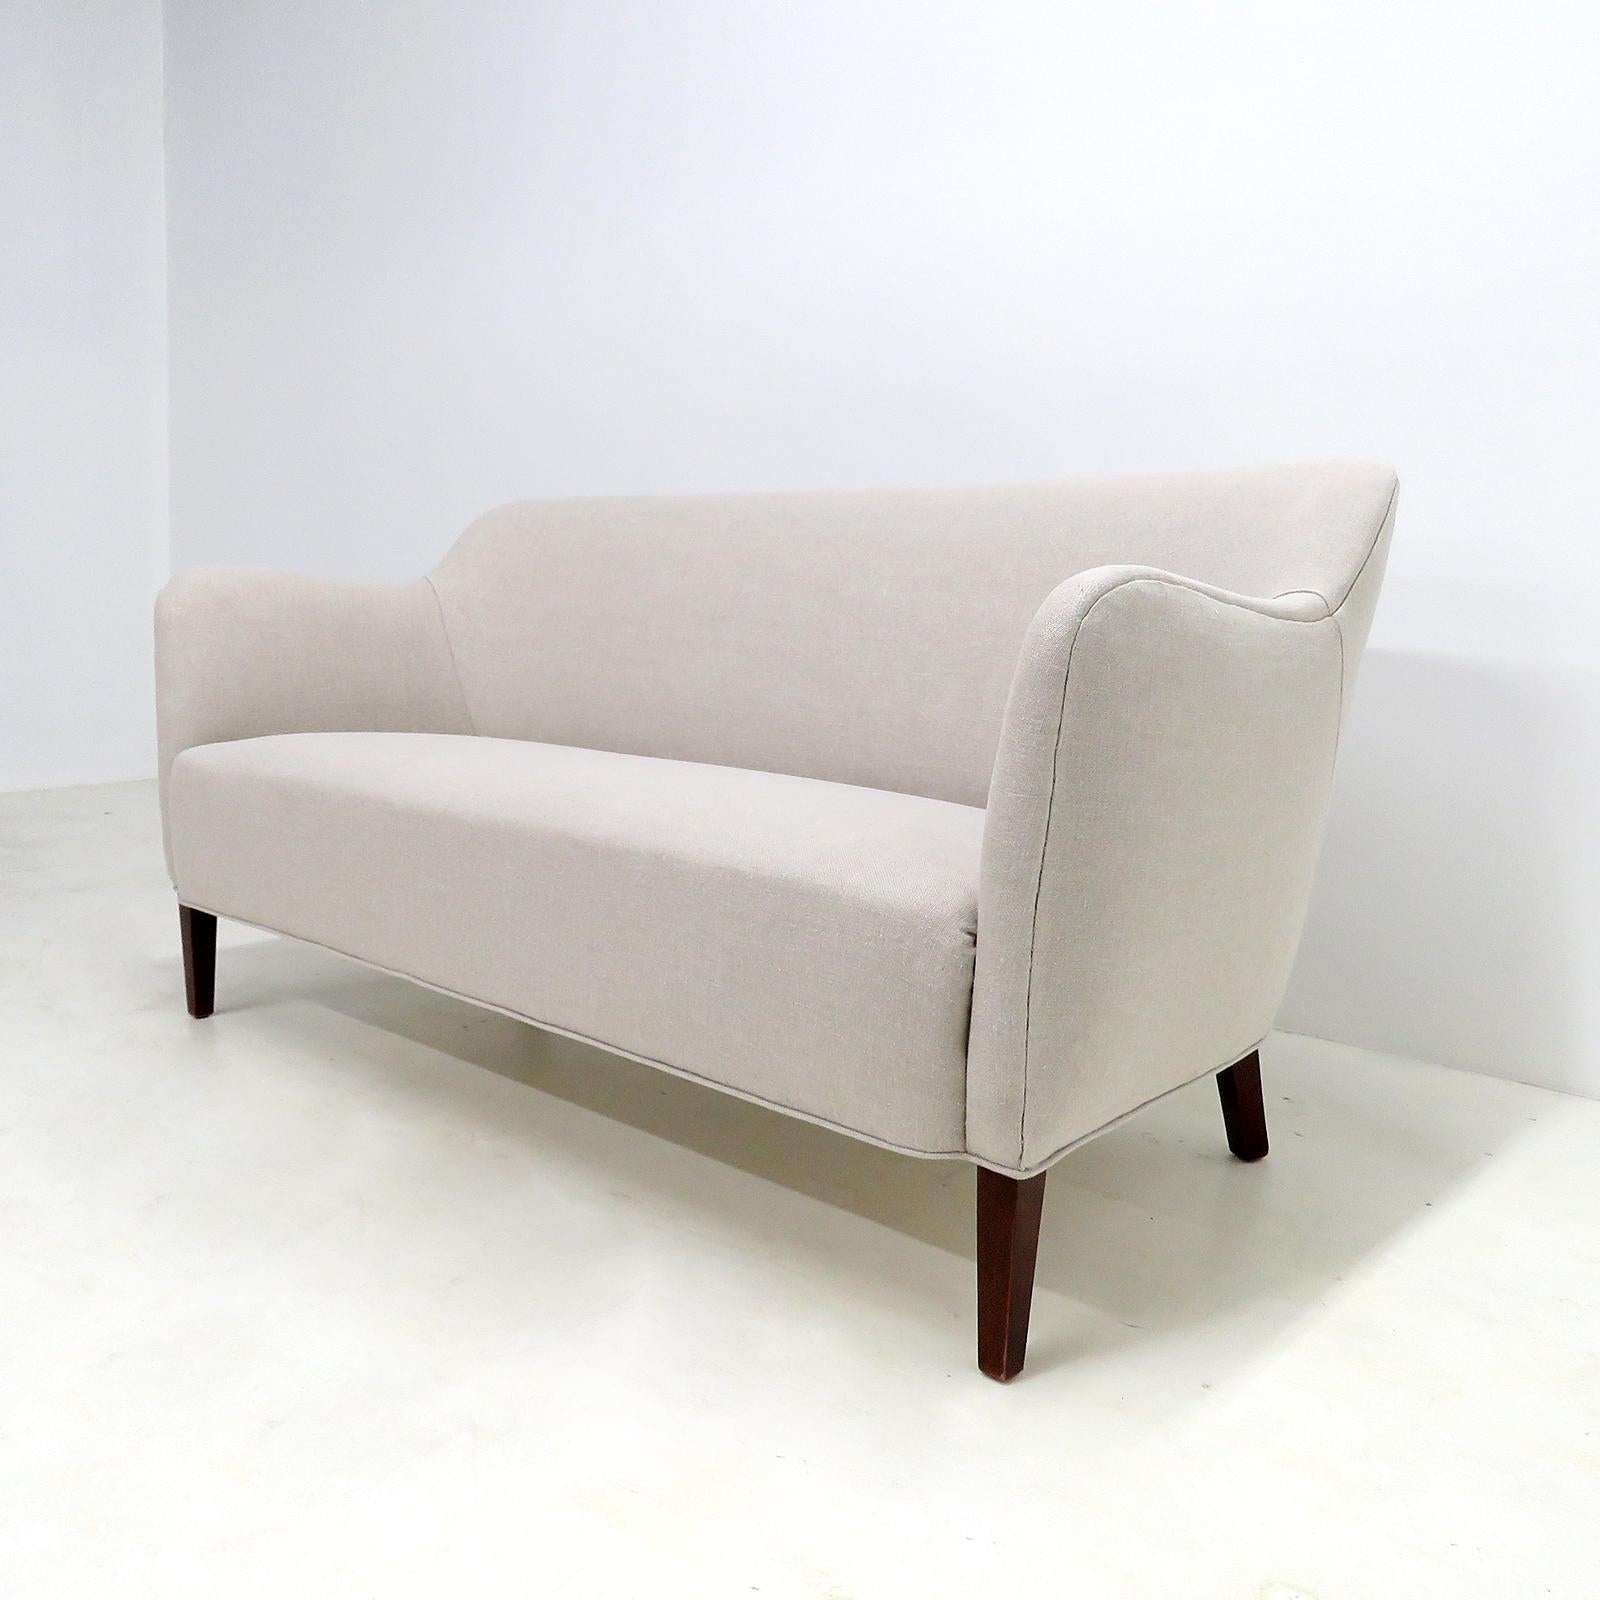 Stained Danish Modern Settee by Jacob Kjaer, 1940 For Sale